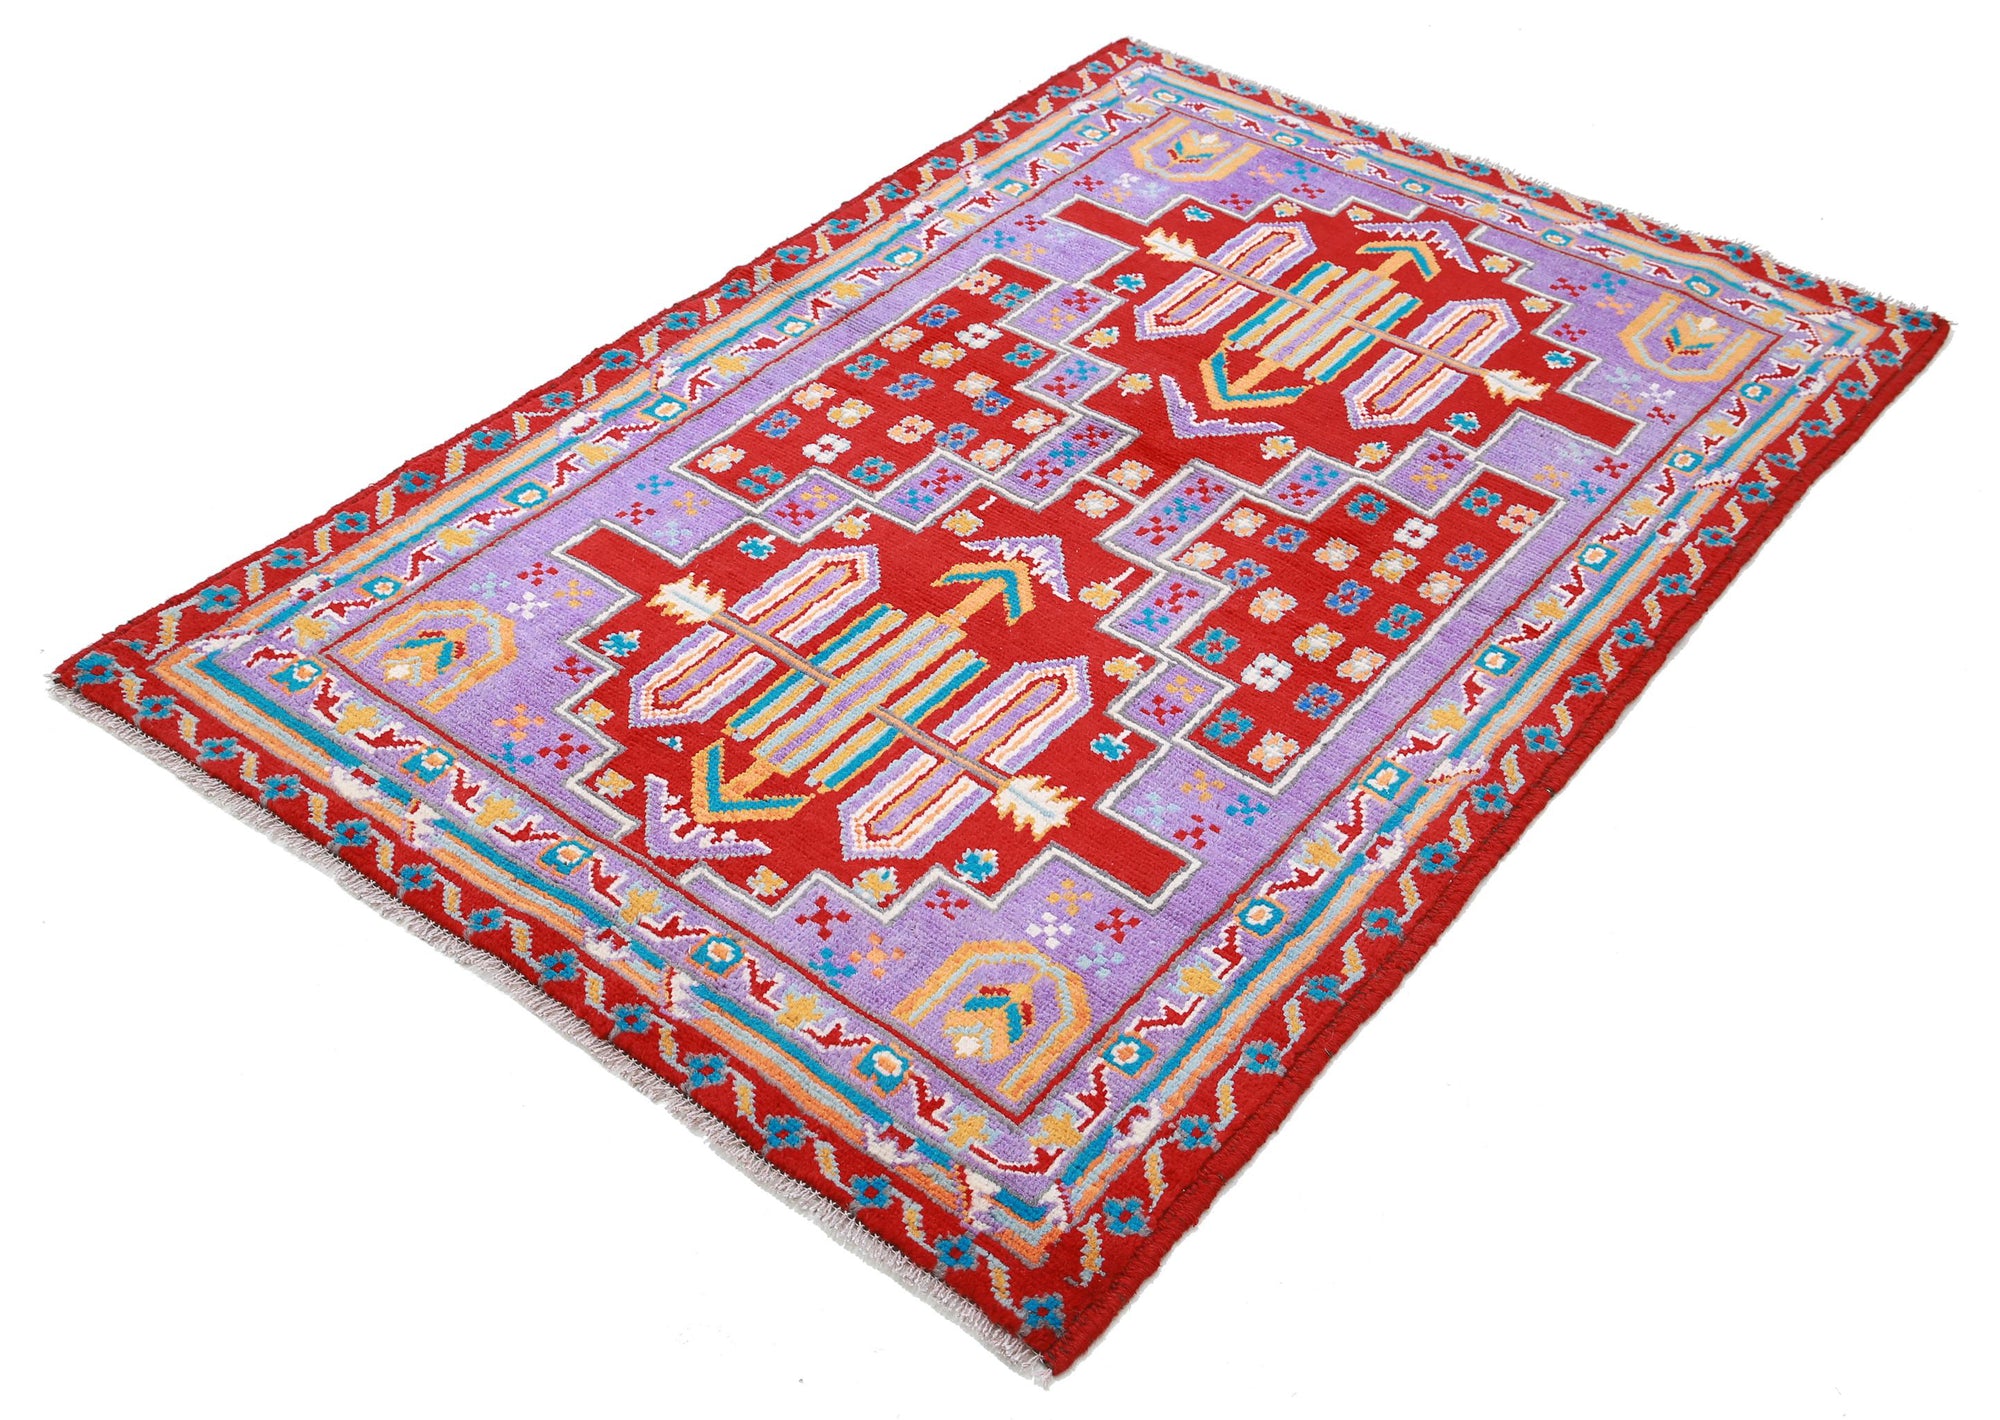 Revival-hand-knotted-qarghani-wool-rug-5014212-2.jpg